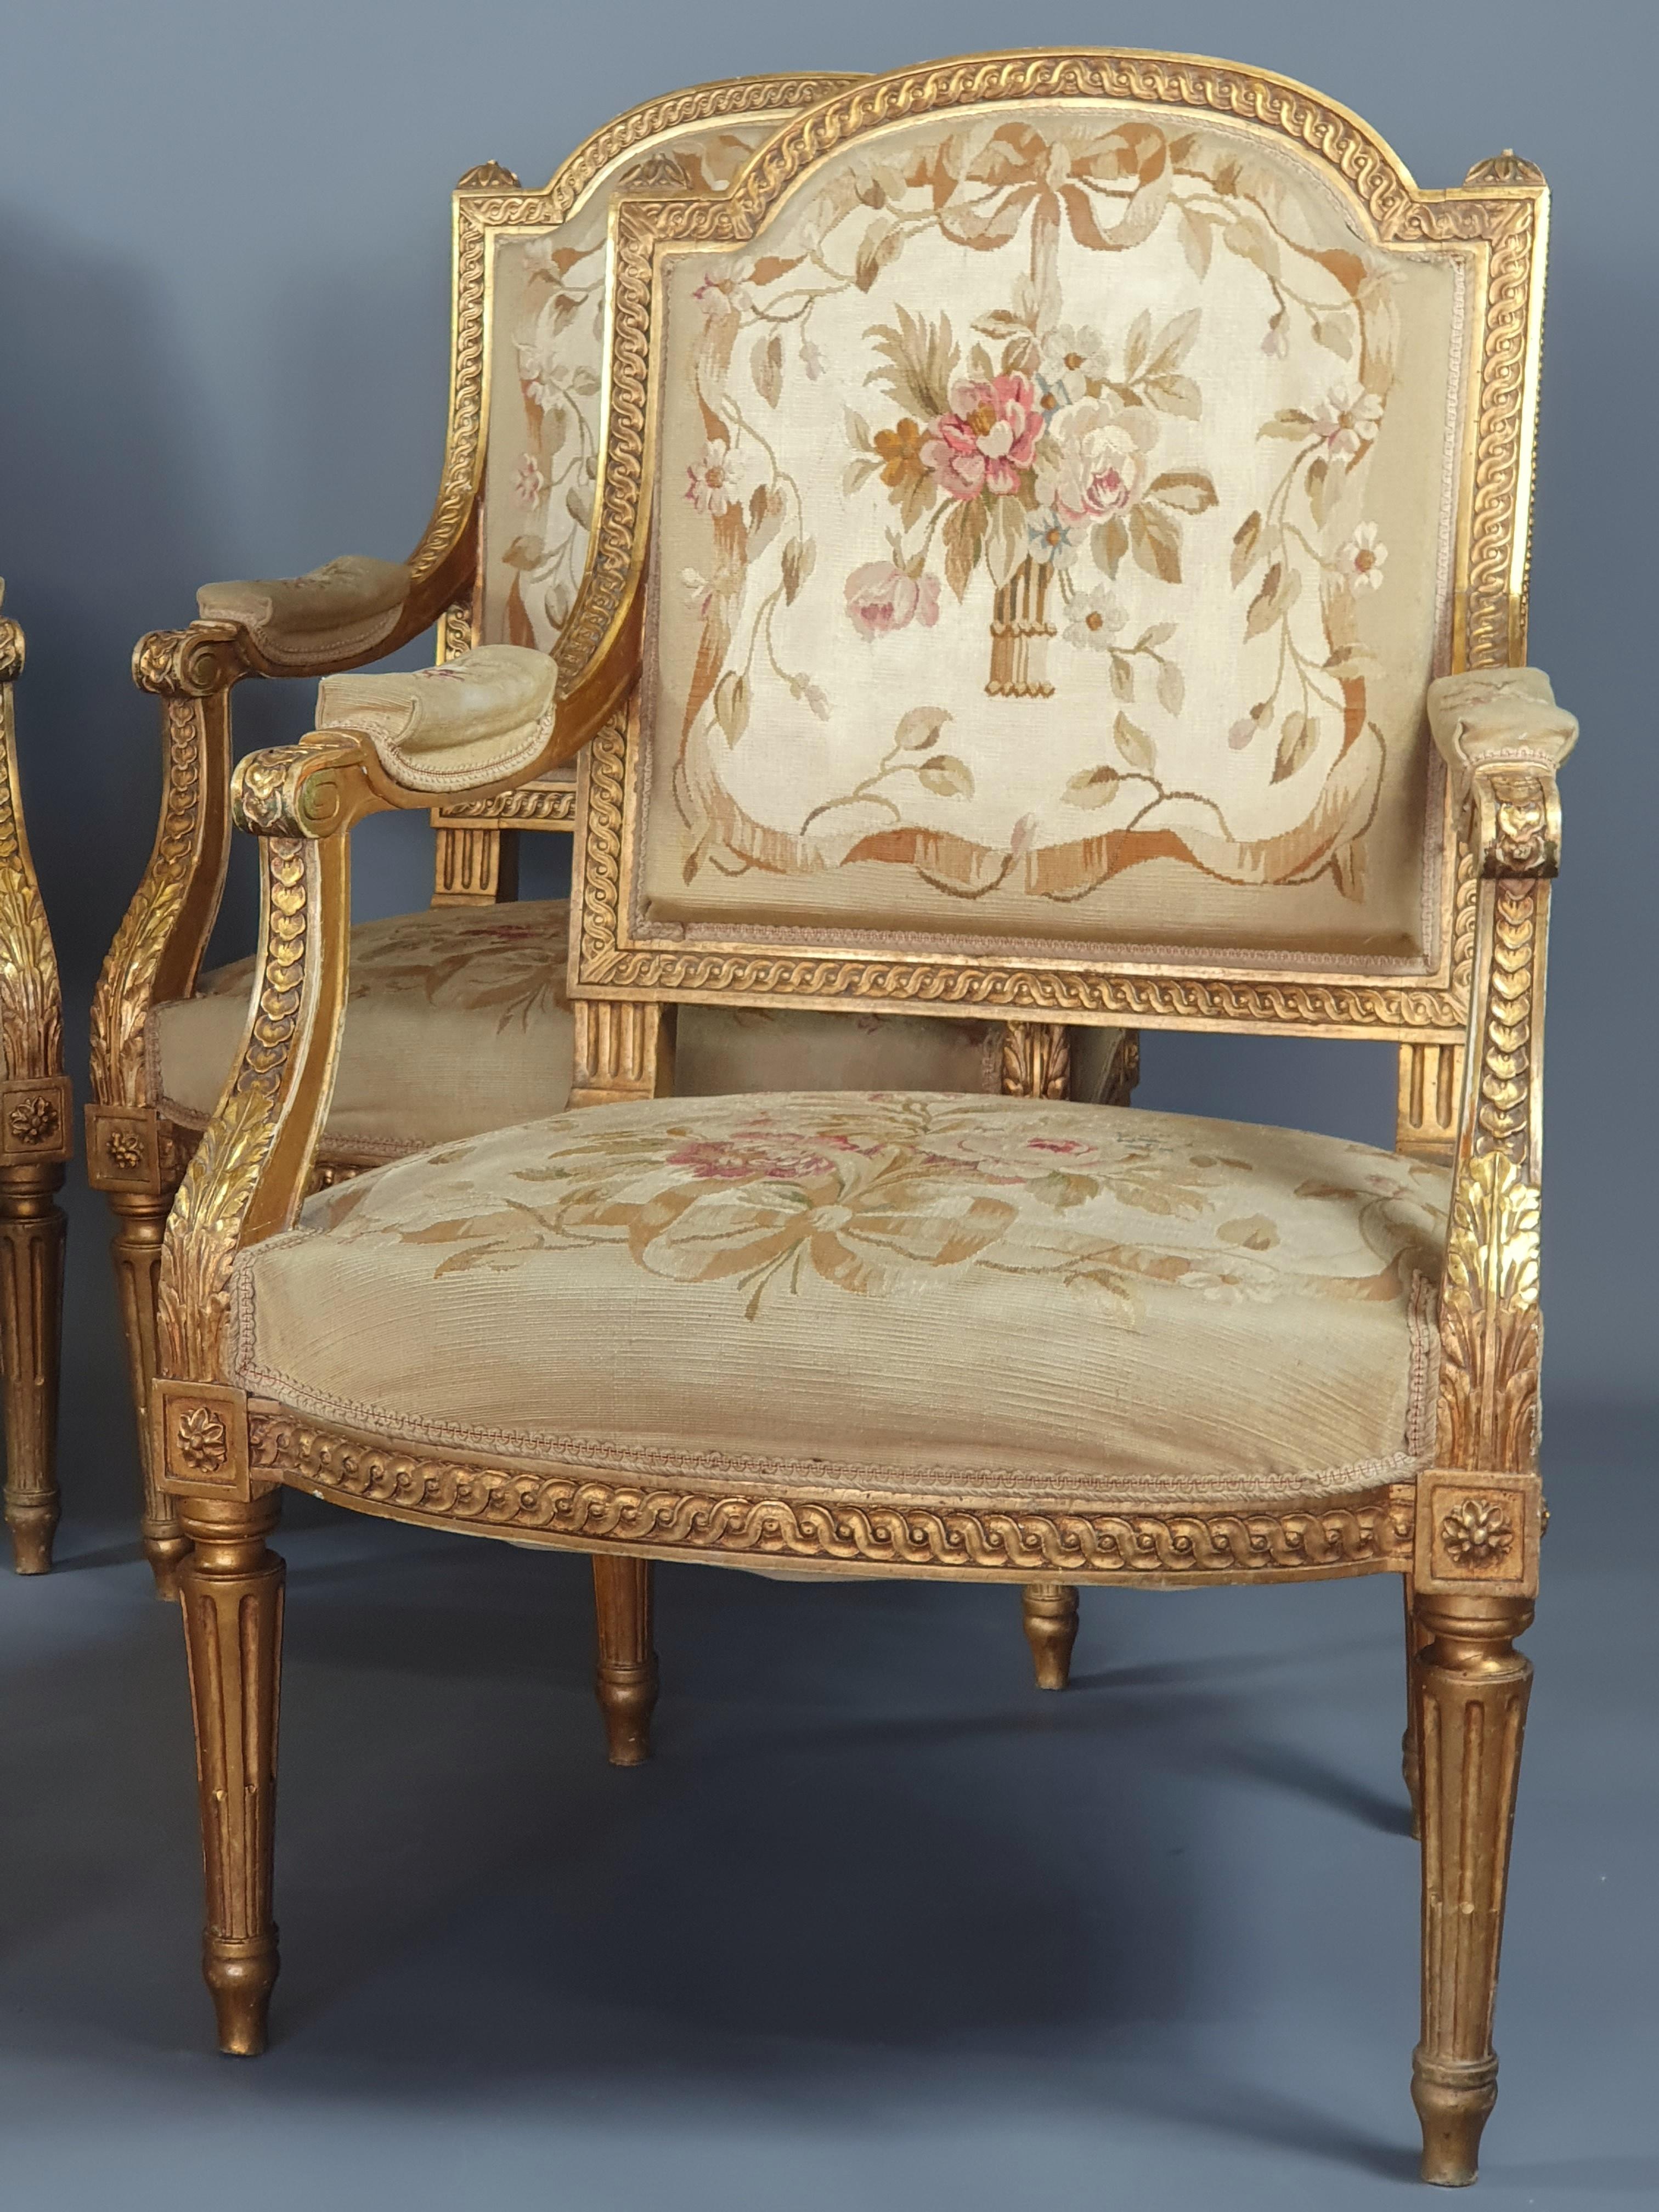 19th Century Louis XVI Living Room Furniture In Gilded Wood And Aubusson Tapestry